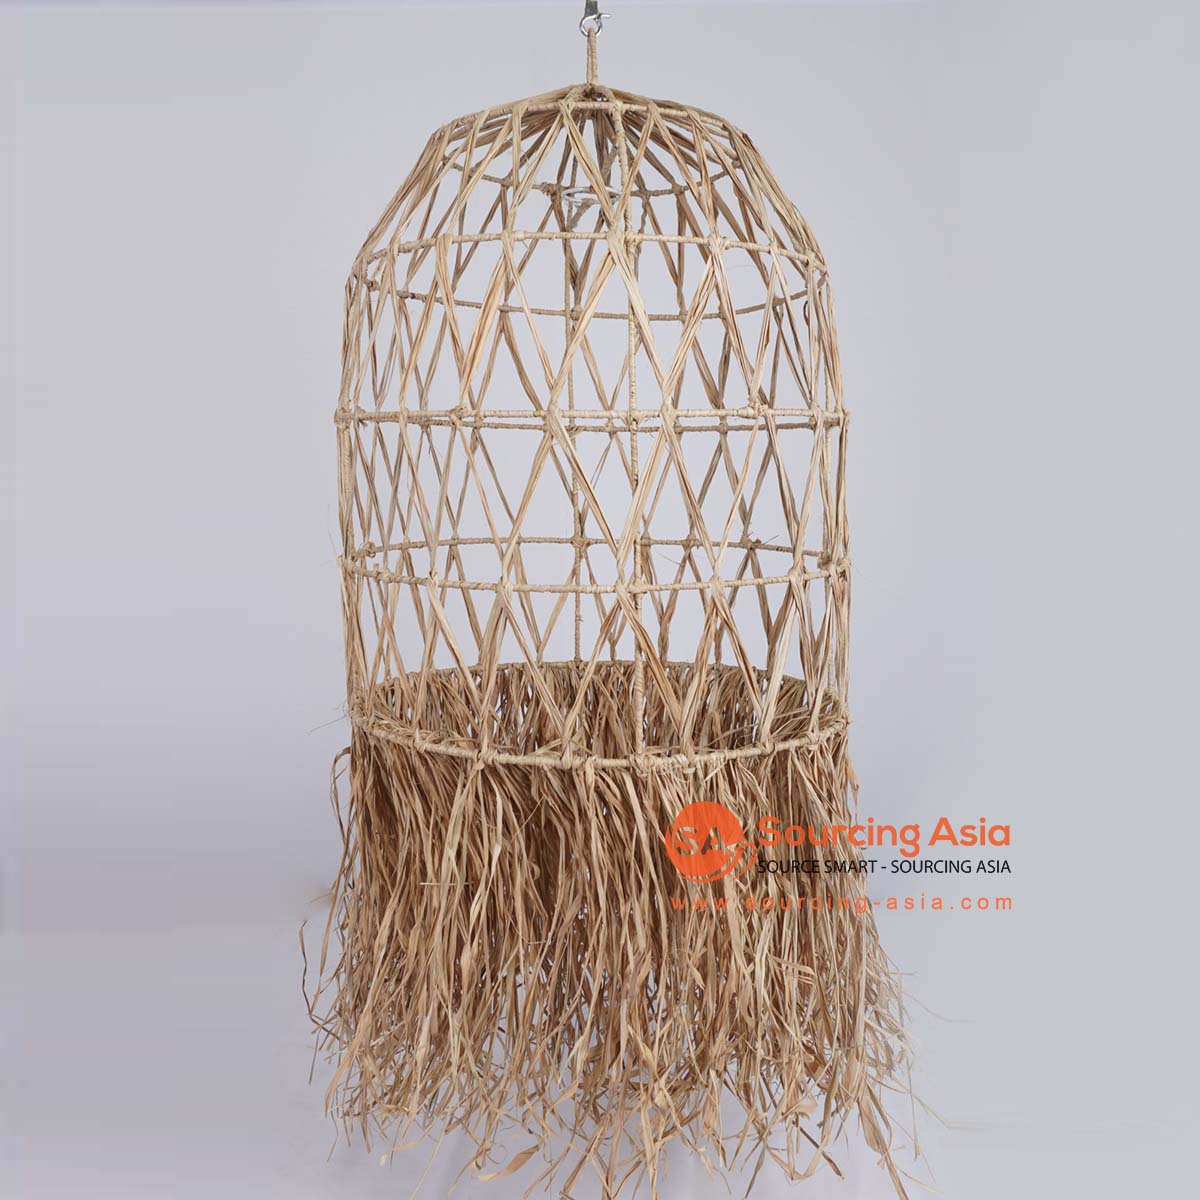 HBSC495 NATURAL GAJIH DECORATIVE CAGE PENDANT LAMP WITH FRINGE